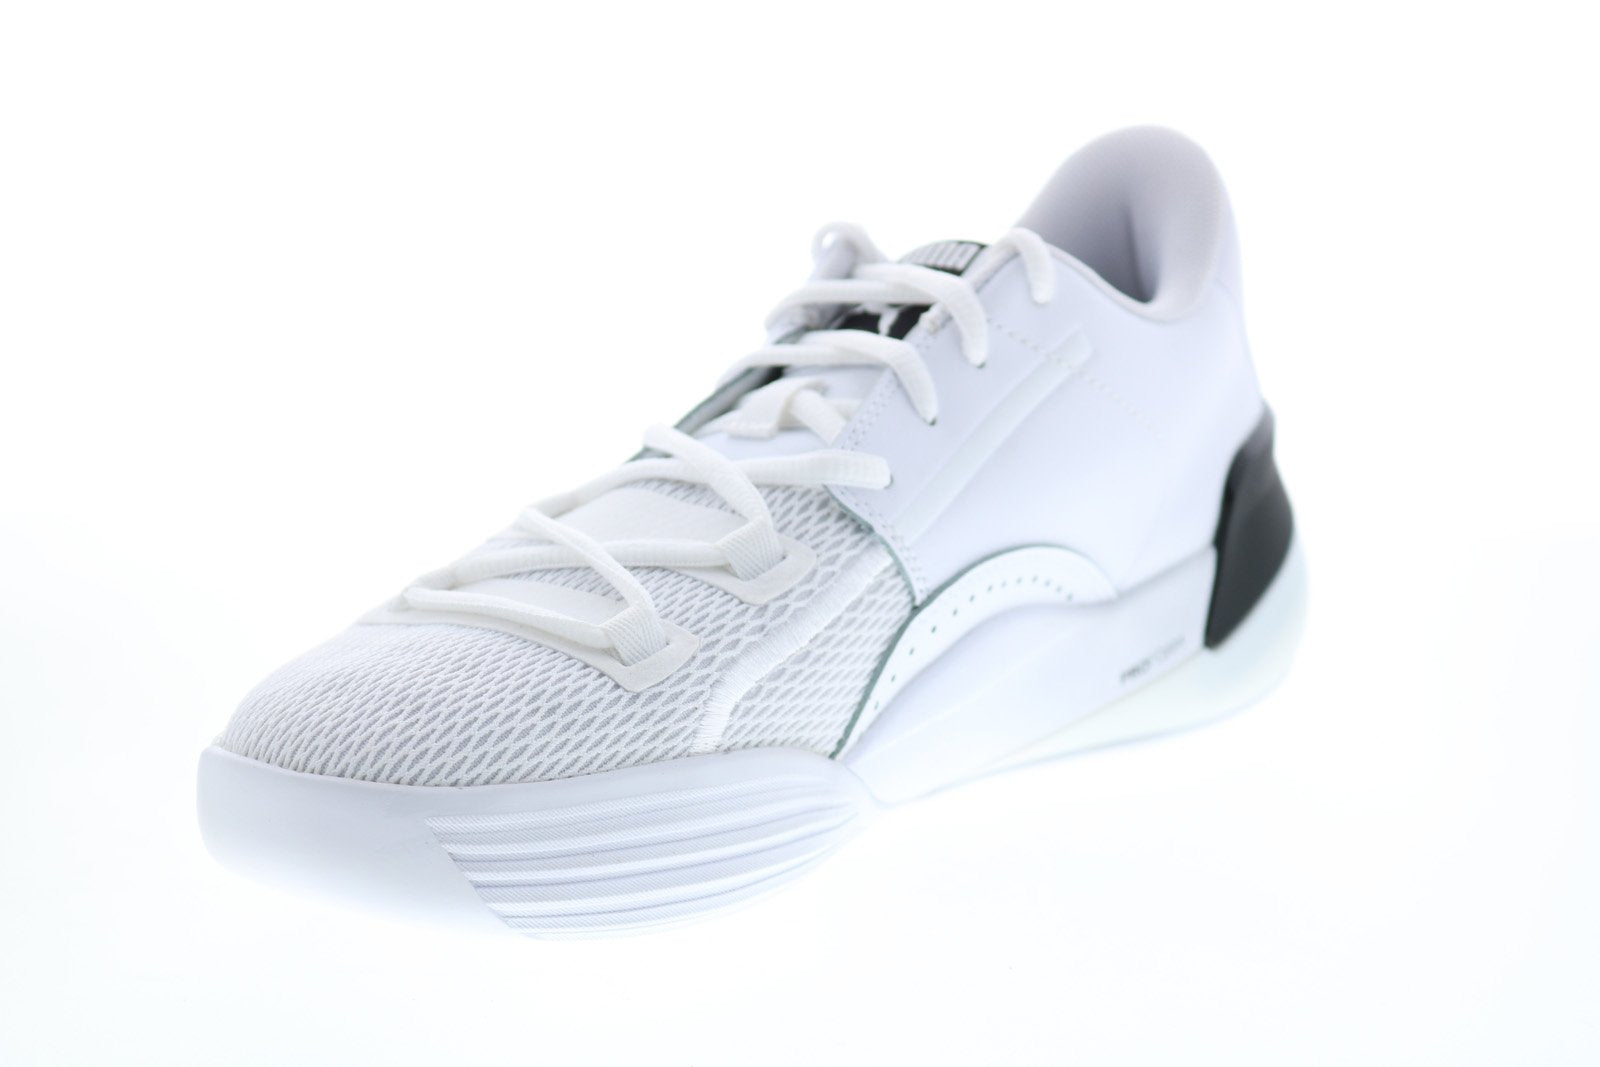 Puma Clyde Hardwood Team 19445401 Mens White Athletic Basketball Shoes ...